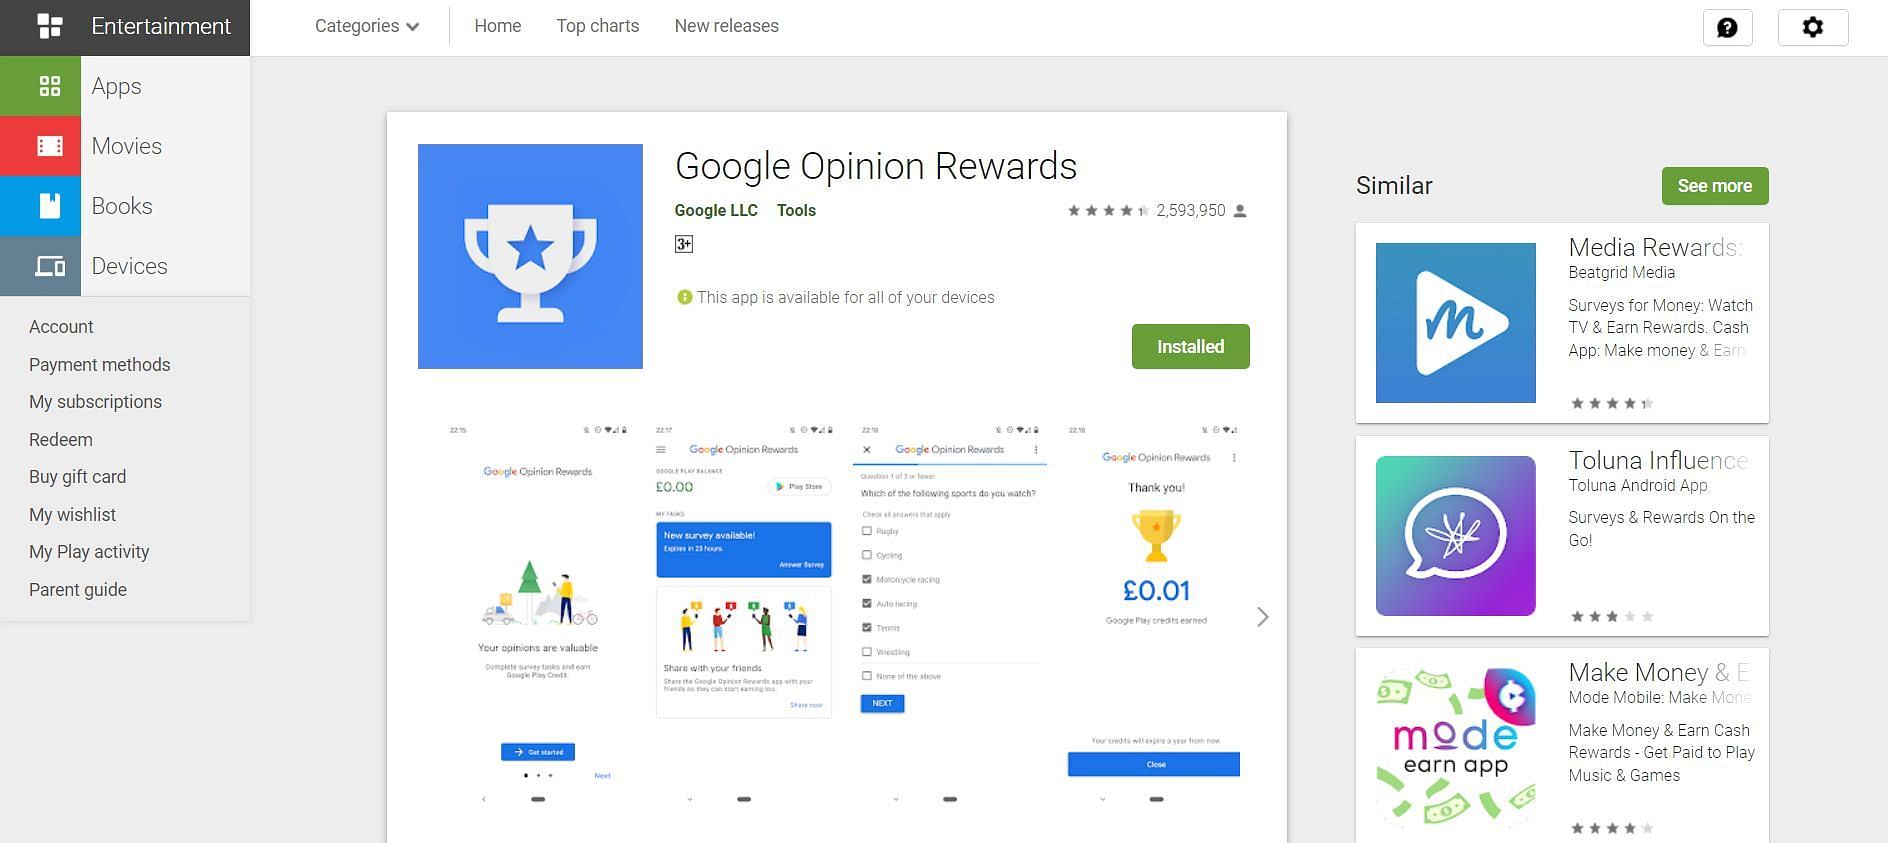 One can acquire Play Store balance using Google Opinion Rewards (Image via Google Play Store)